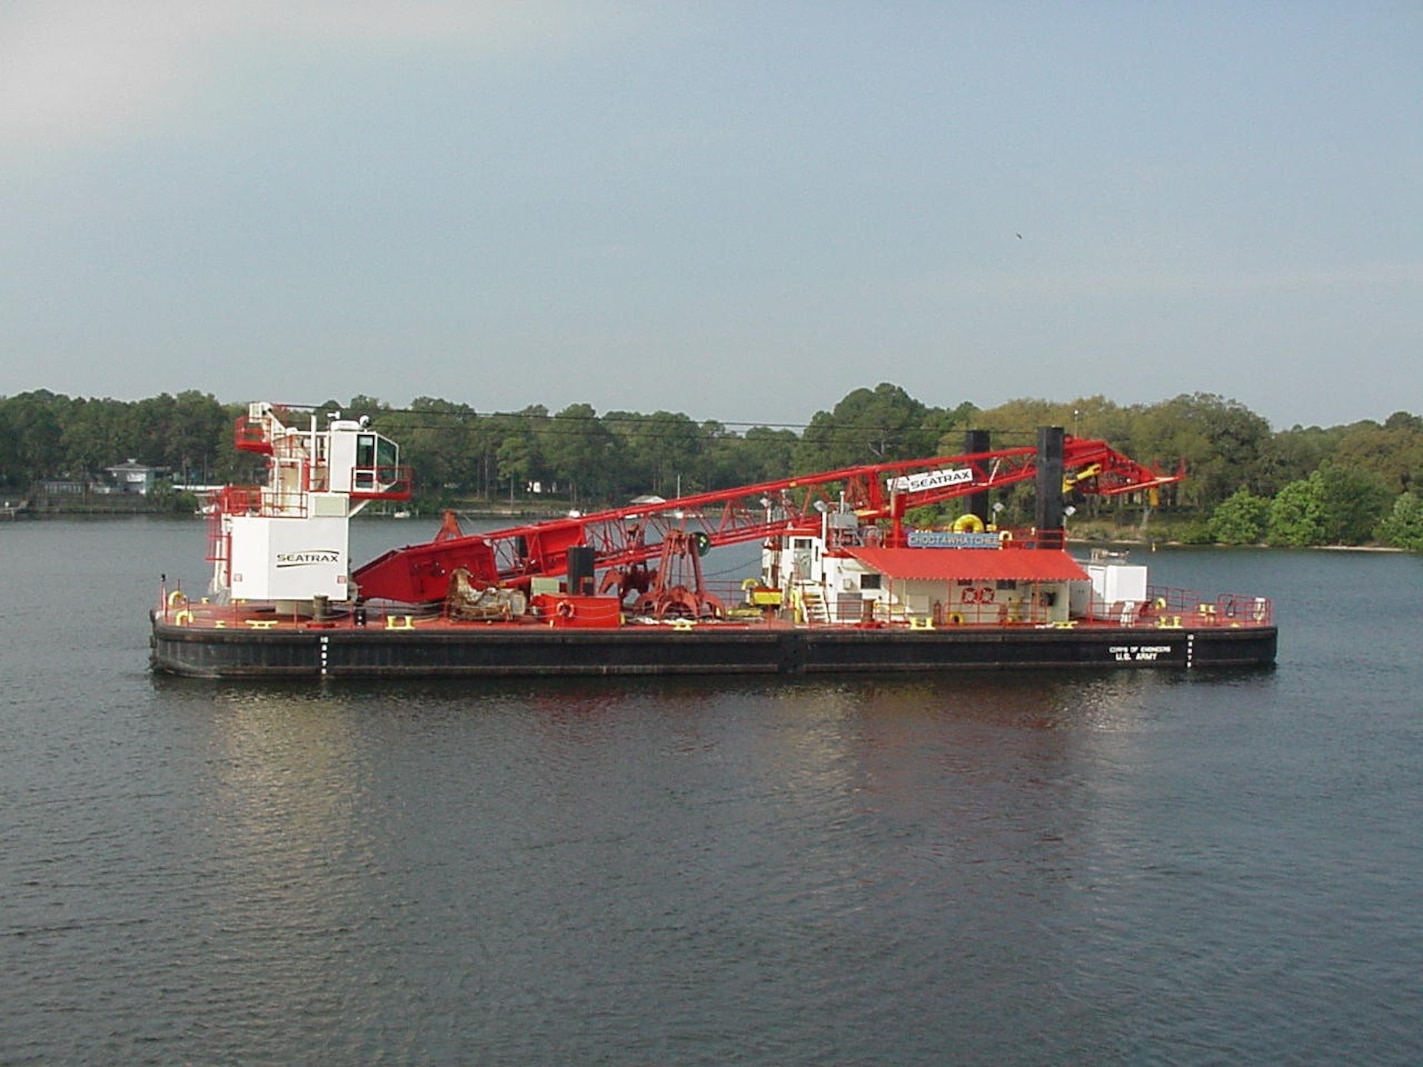 The USACE Marine Design Center oversaw the design and procurement of the CRANE BARGE CHOCTAWHATCHEE on behalf of the USACE Mobile District. 